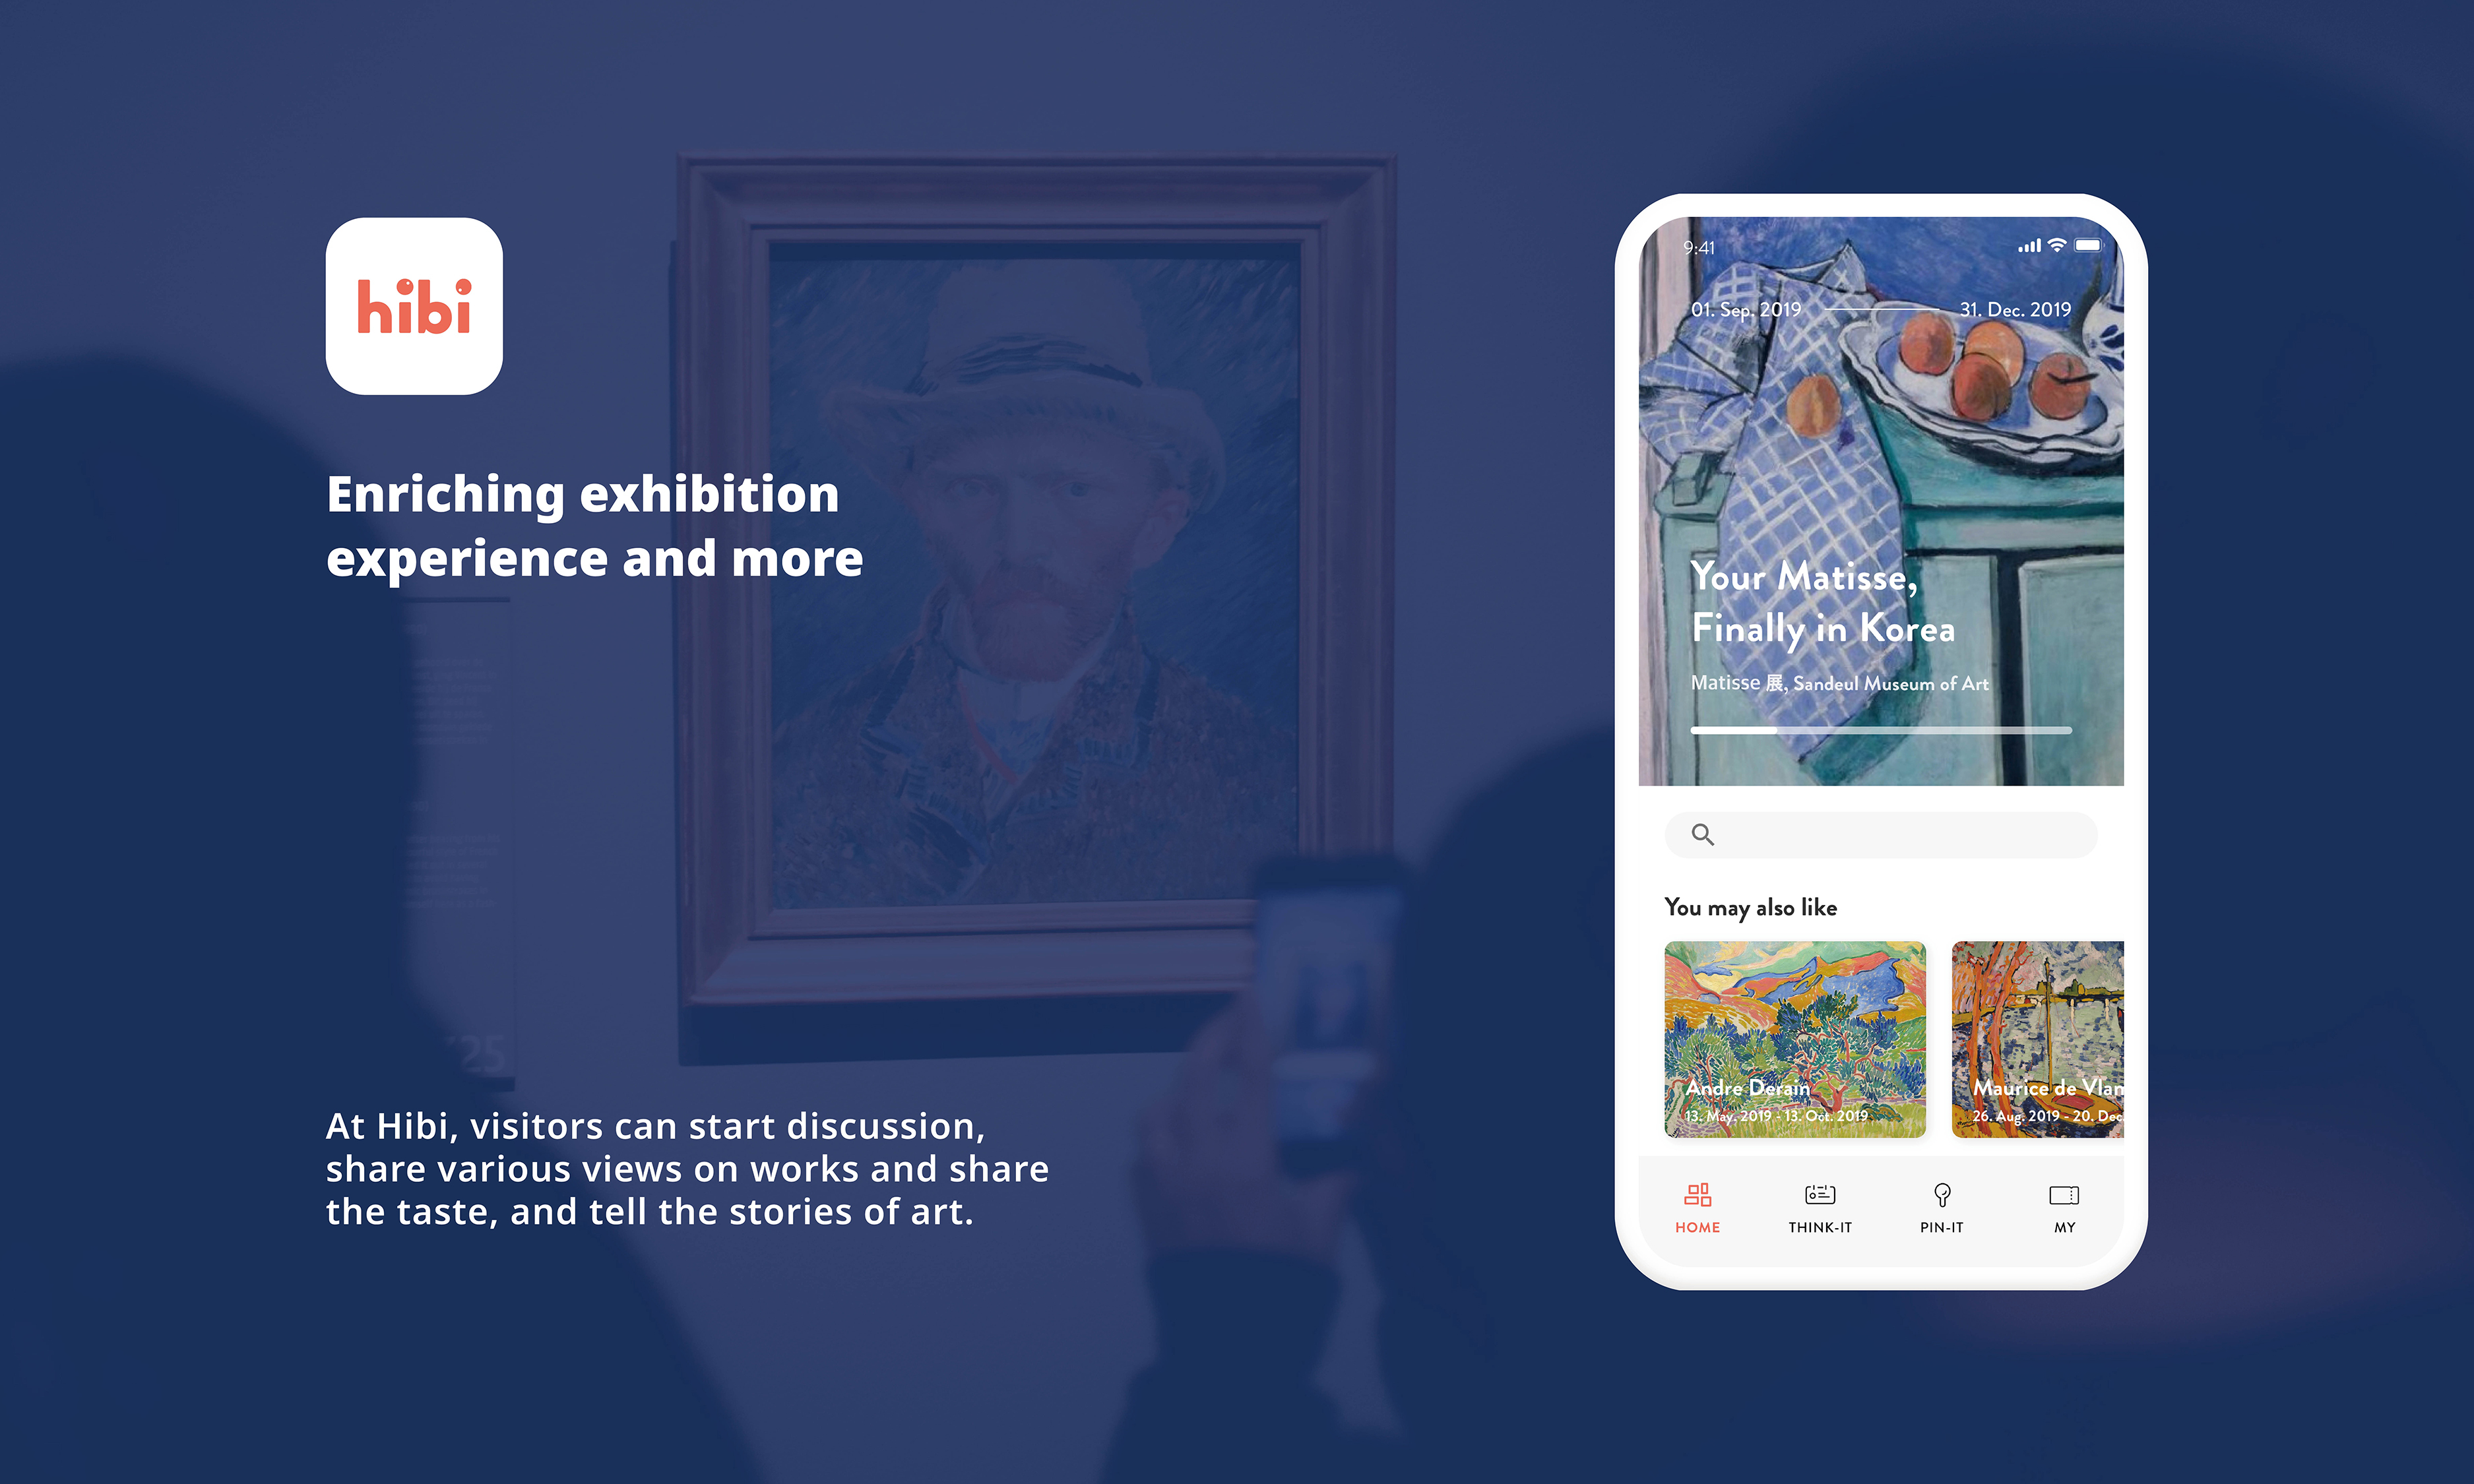 HIBI - Enriching exhibition experience and more